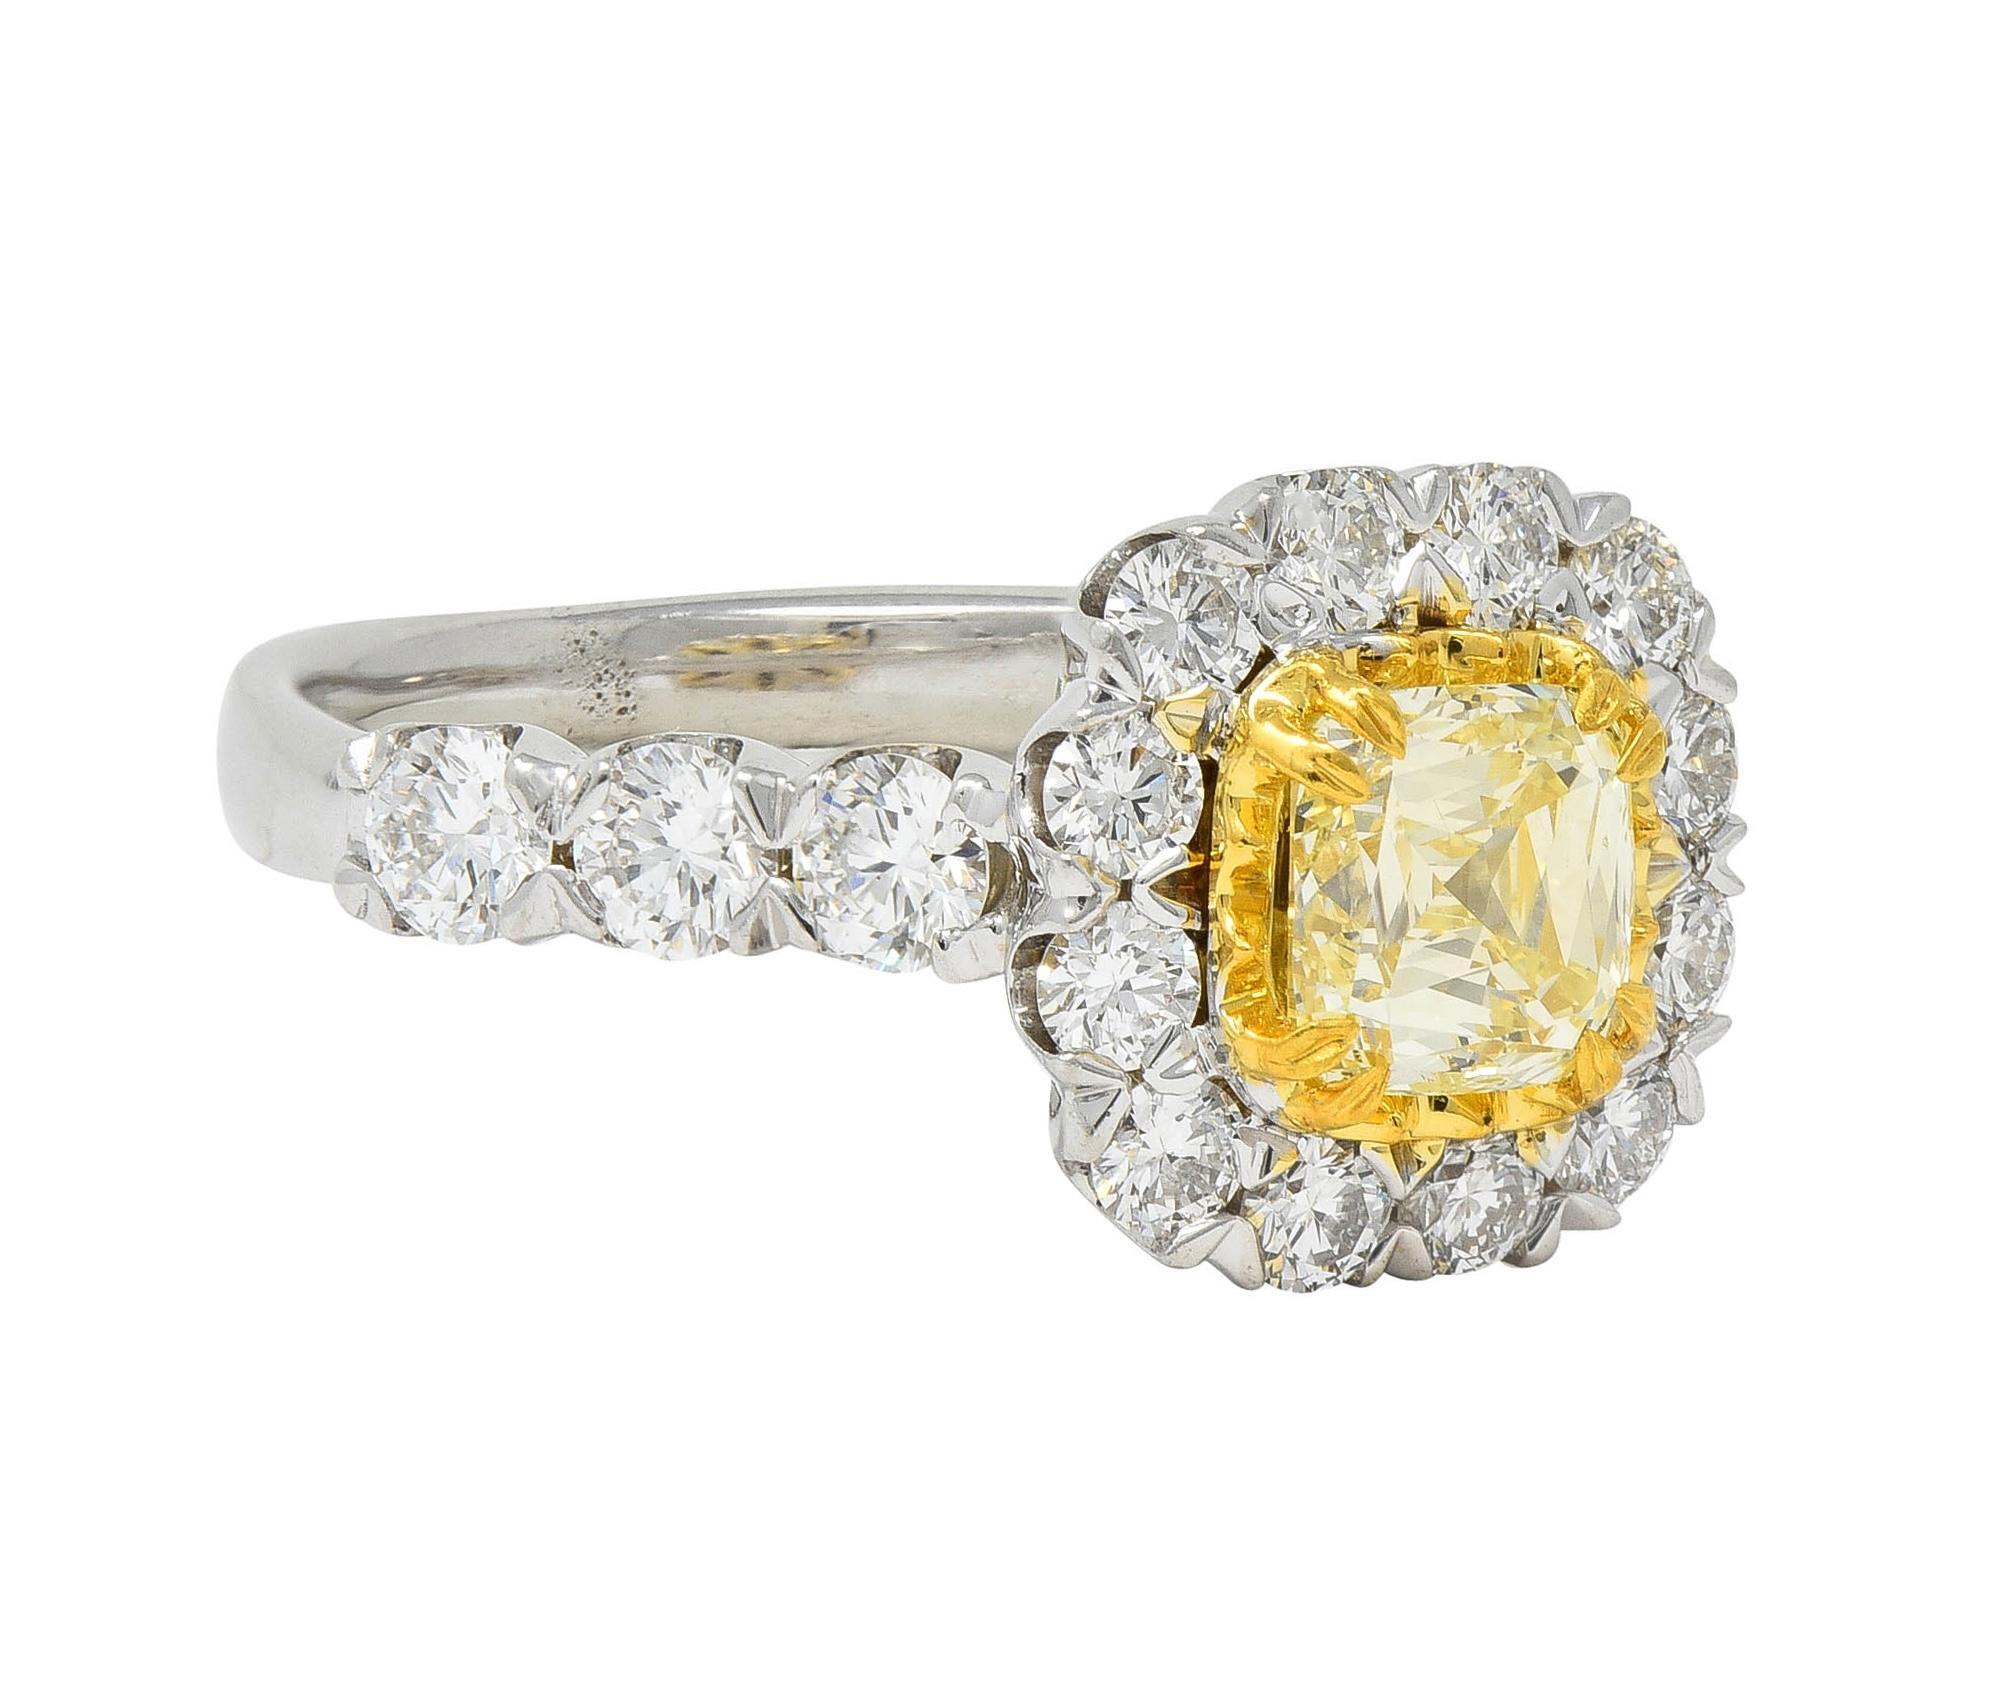 Centering a cushion-shaped modified brilliant cut diamond weighing 1.01 carats total
S to T range color with SI2 clarity - set with split talon prongs in scalloped yellow gold mount
With a halo surround and shoulders prong set with round brilliant